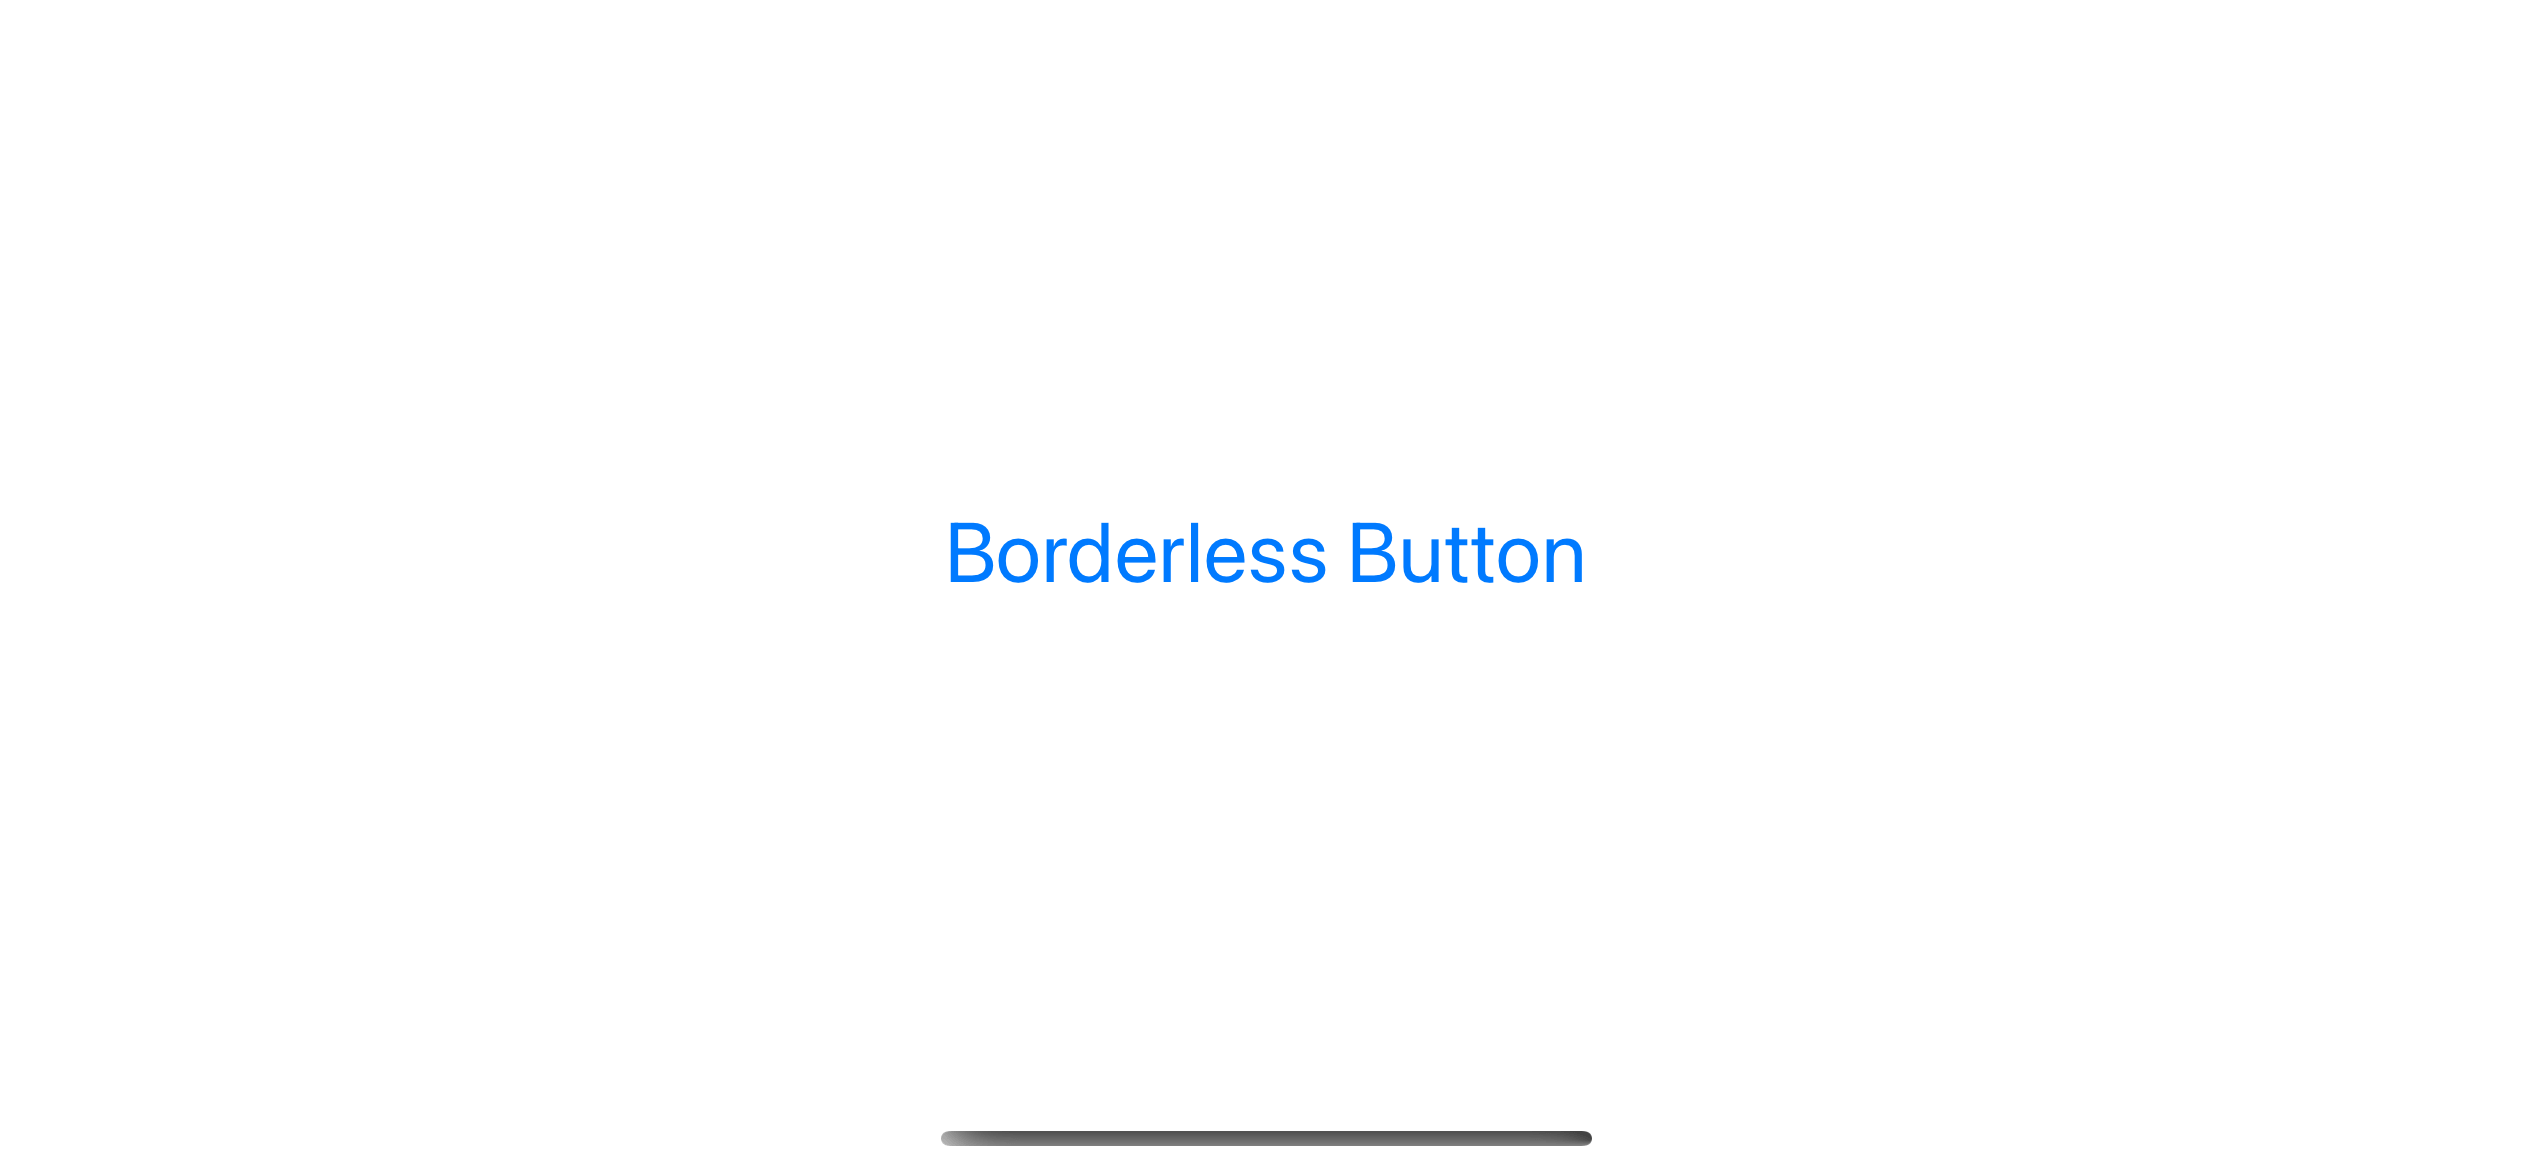 The default button style in iOS.